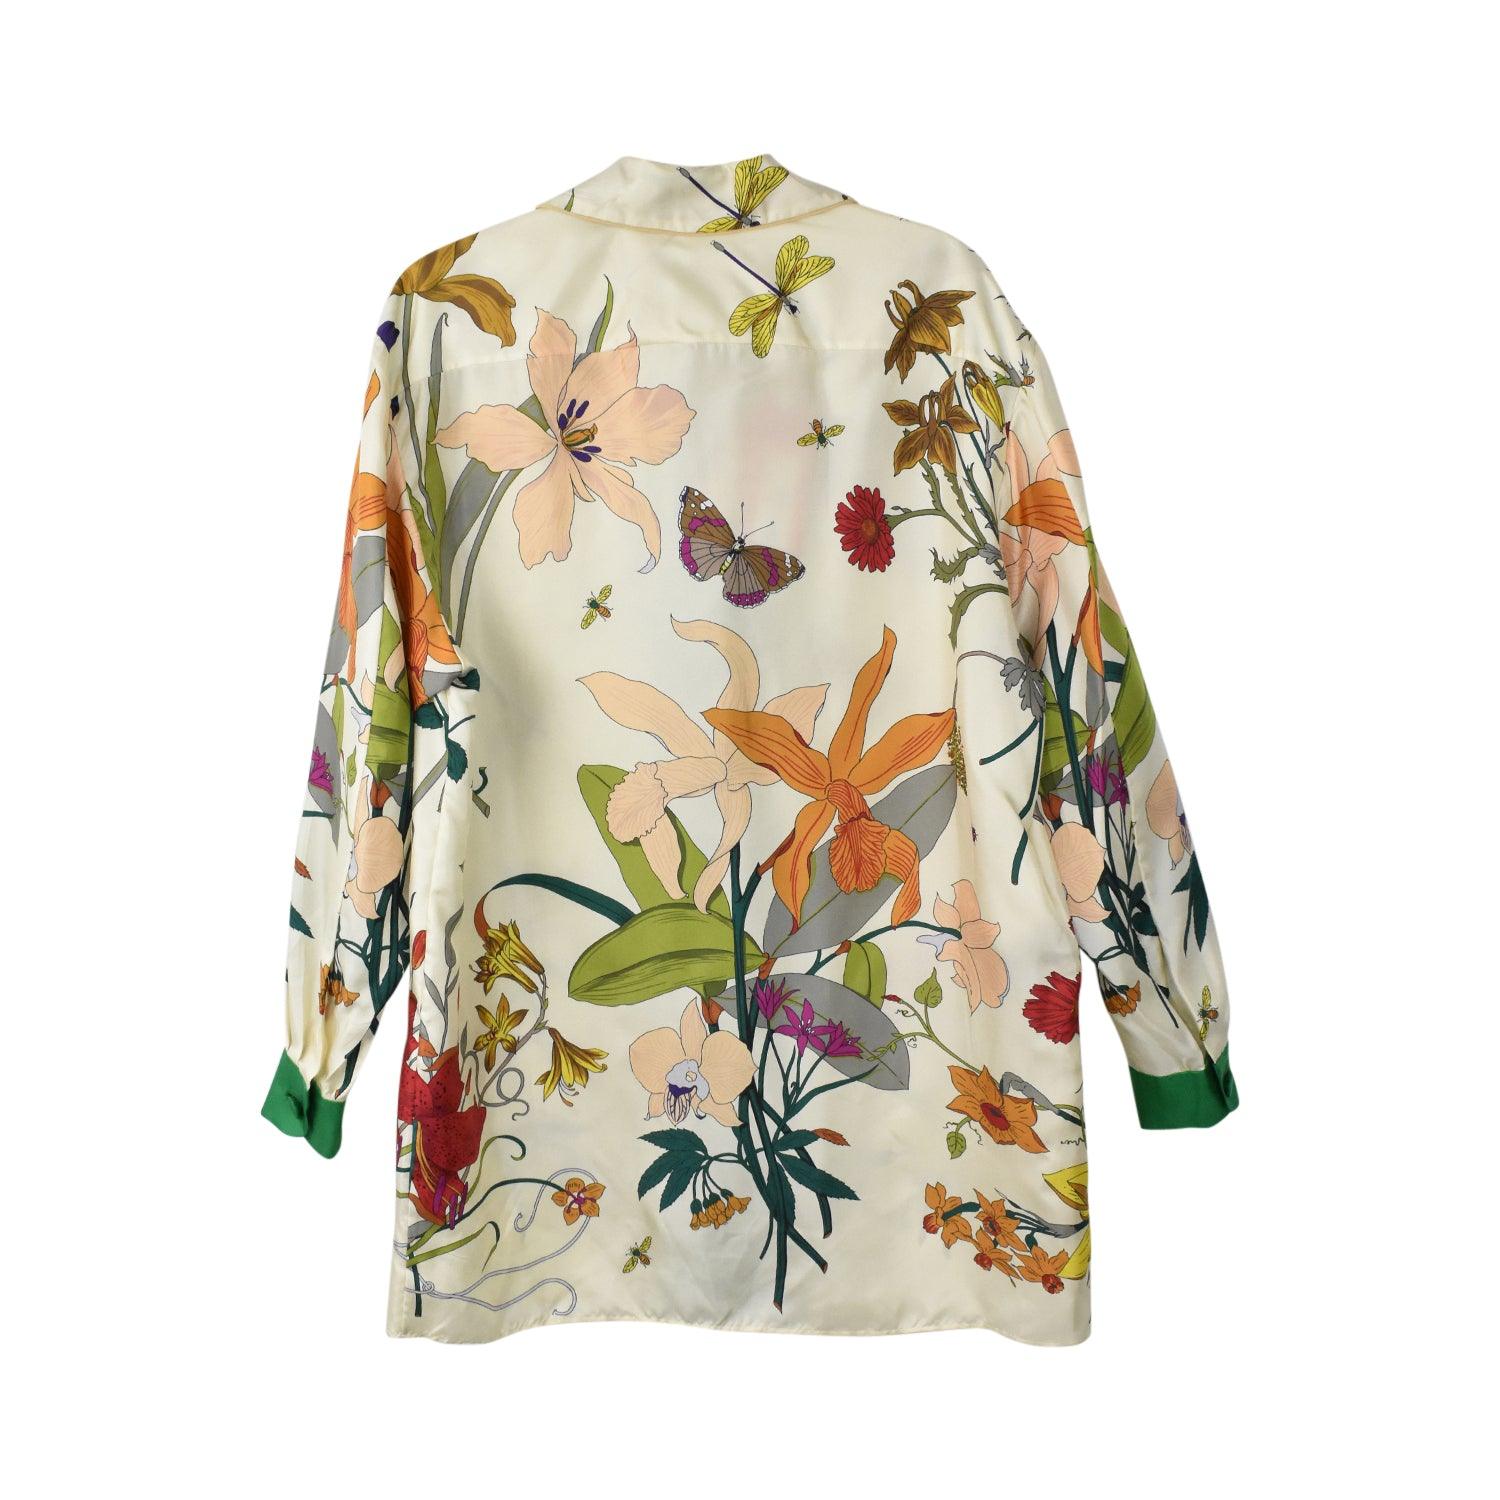 Gucci Blouse - Women’s 38 - Fashionably Yours